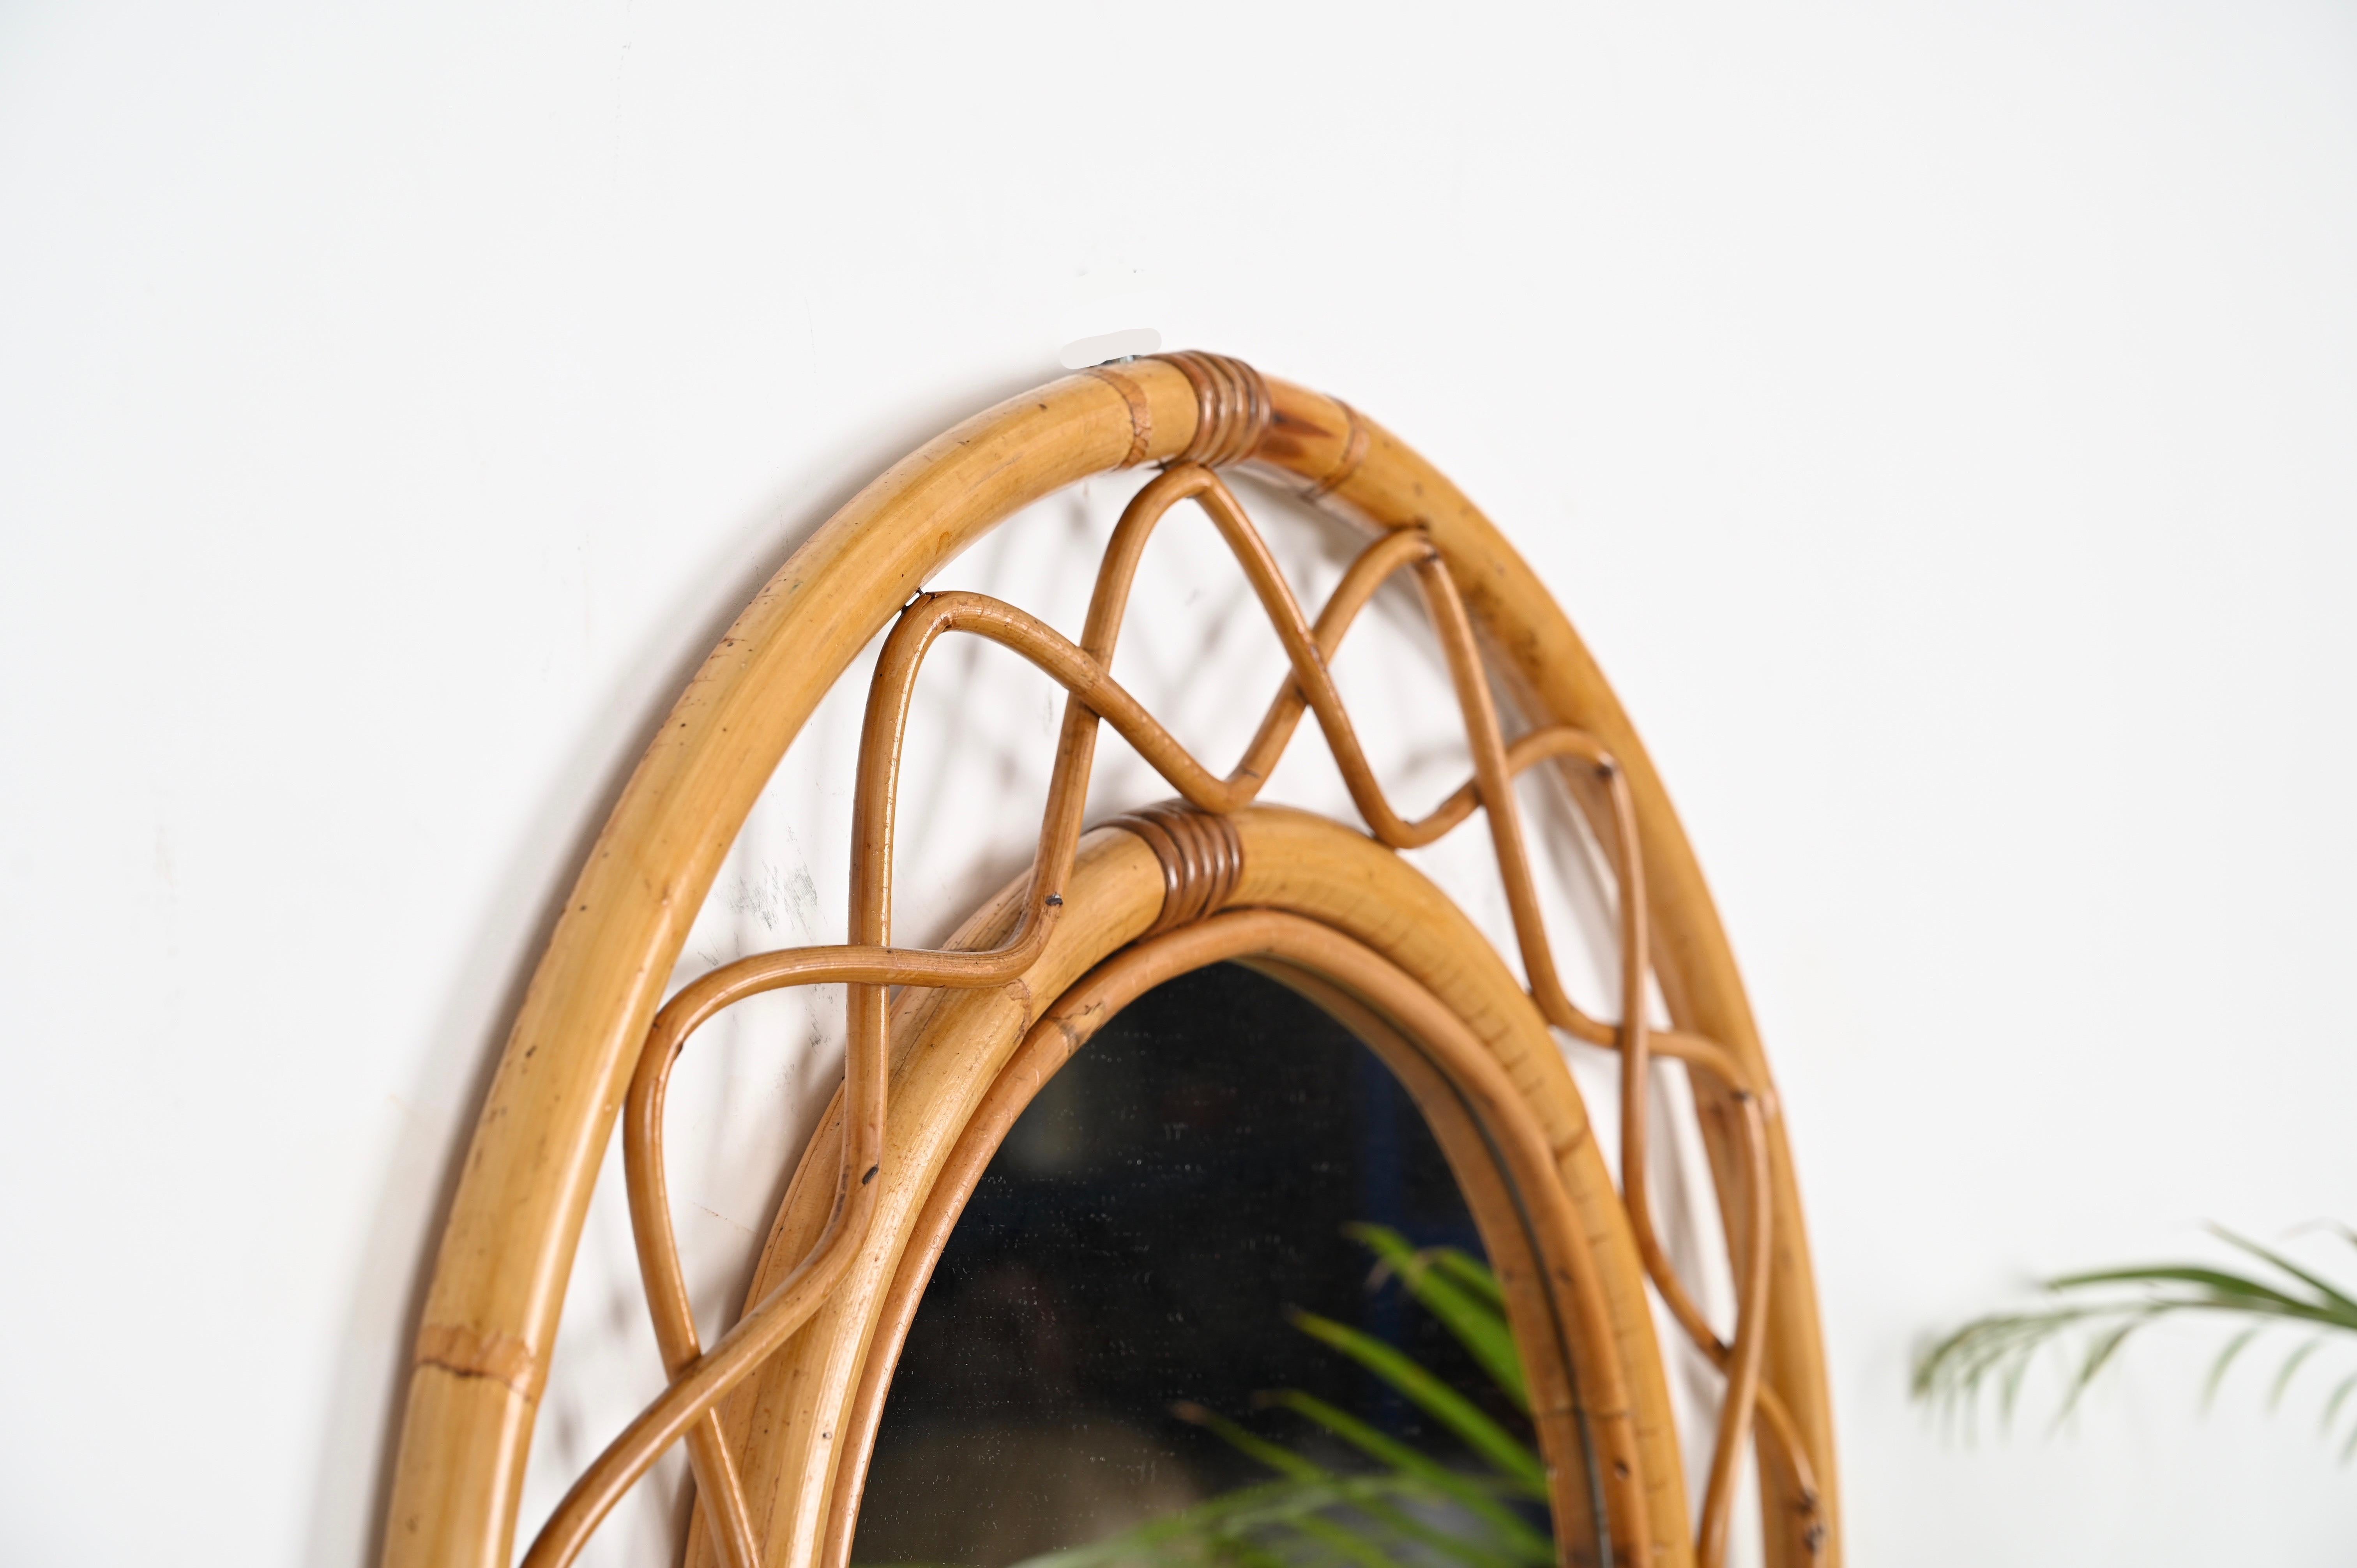 20th Century Midcentury Round Italian Mirror, Curved Bamboo, Rattan and Wicker Frame, 1960s For Sale